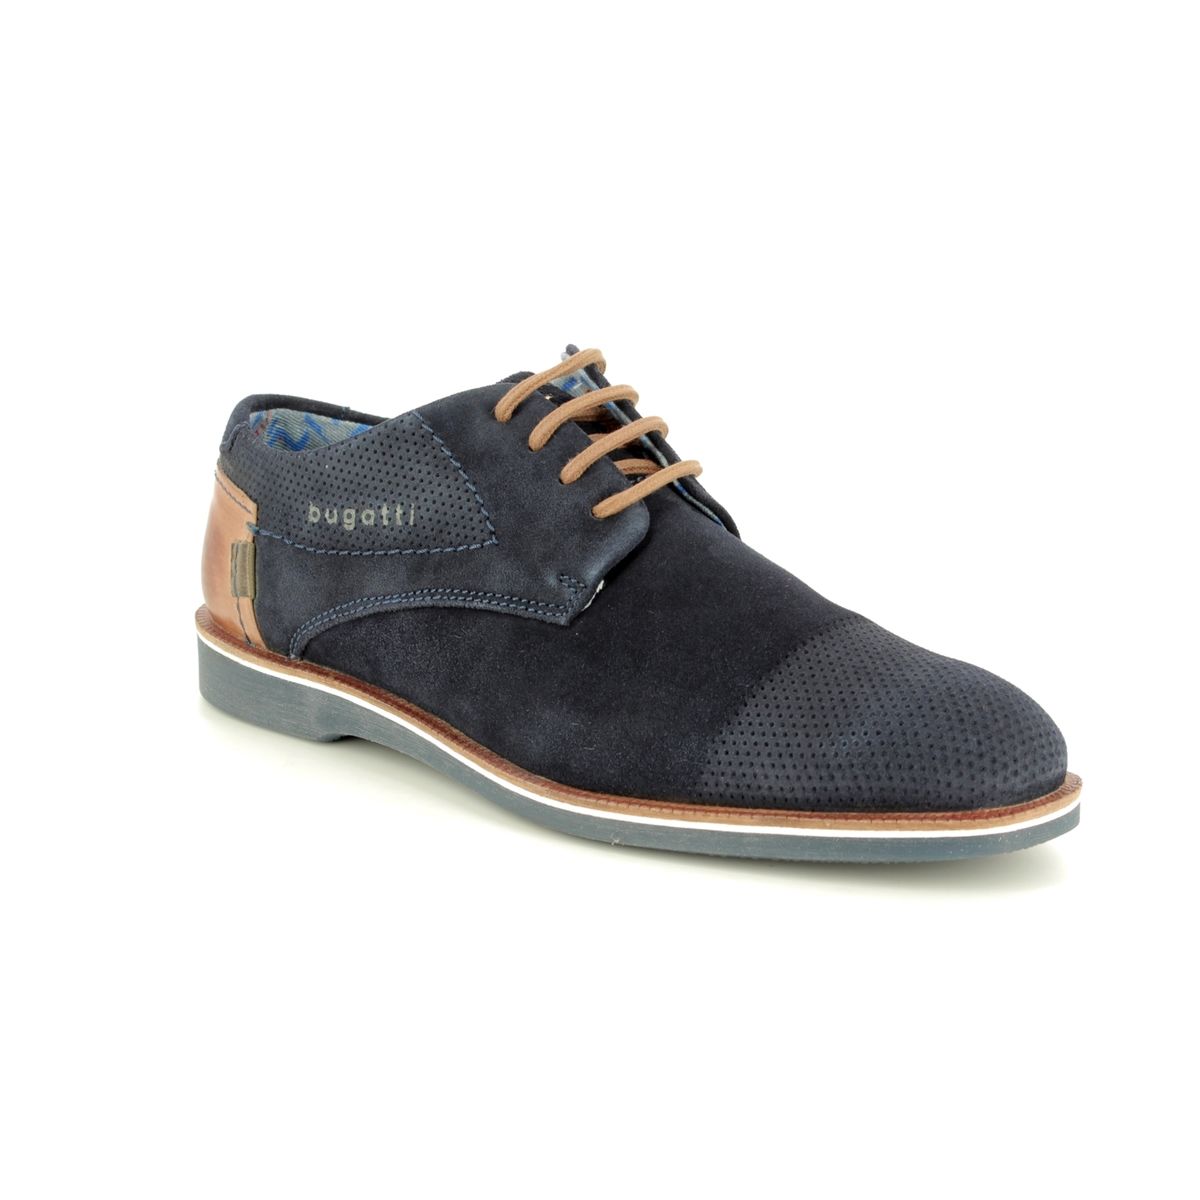 Navy suede casual shoes